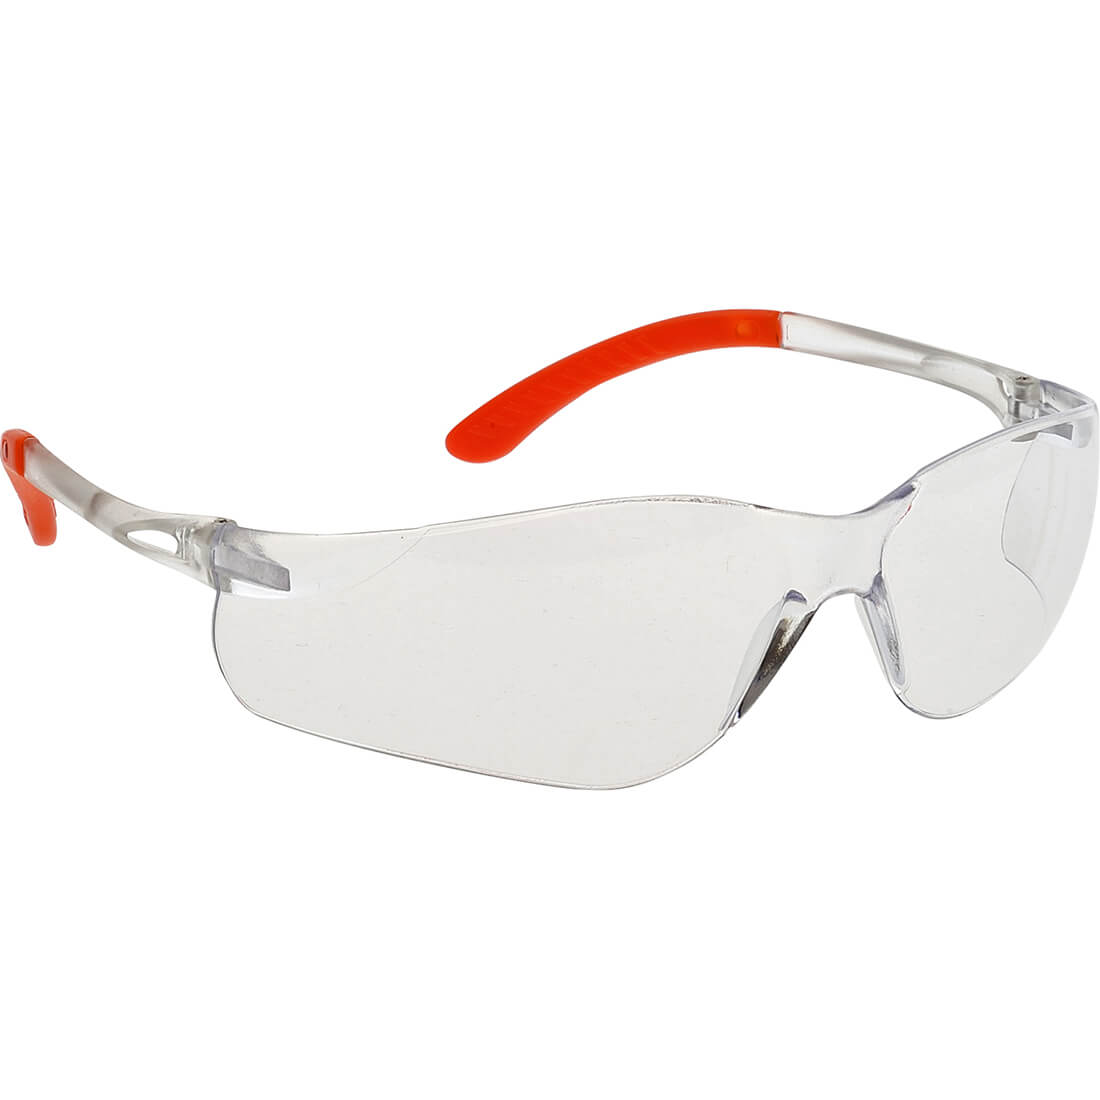 Pan View Spectacles  (PW38)